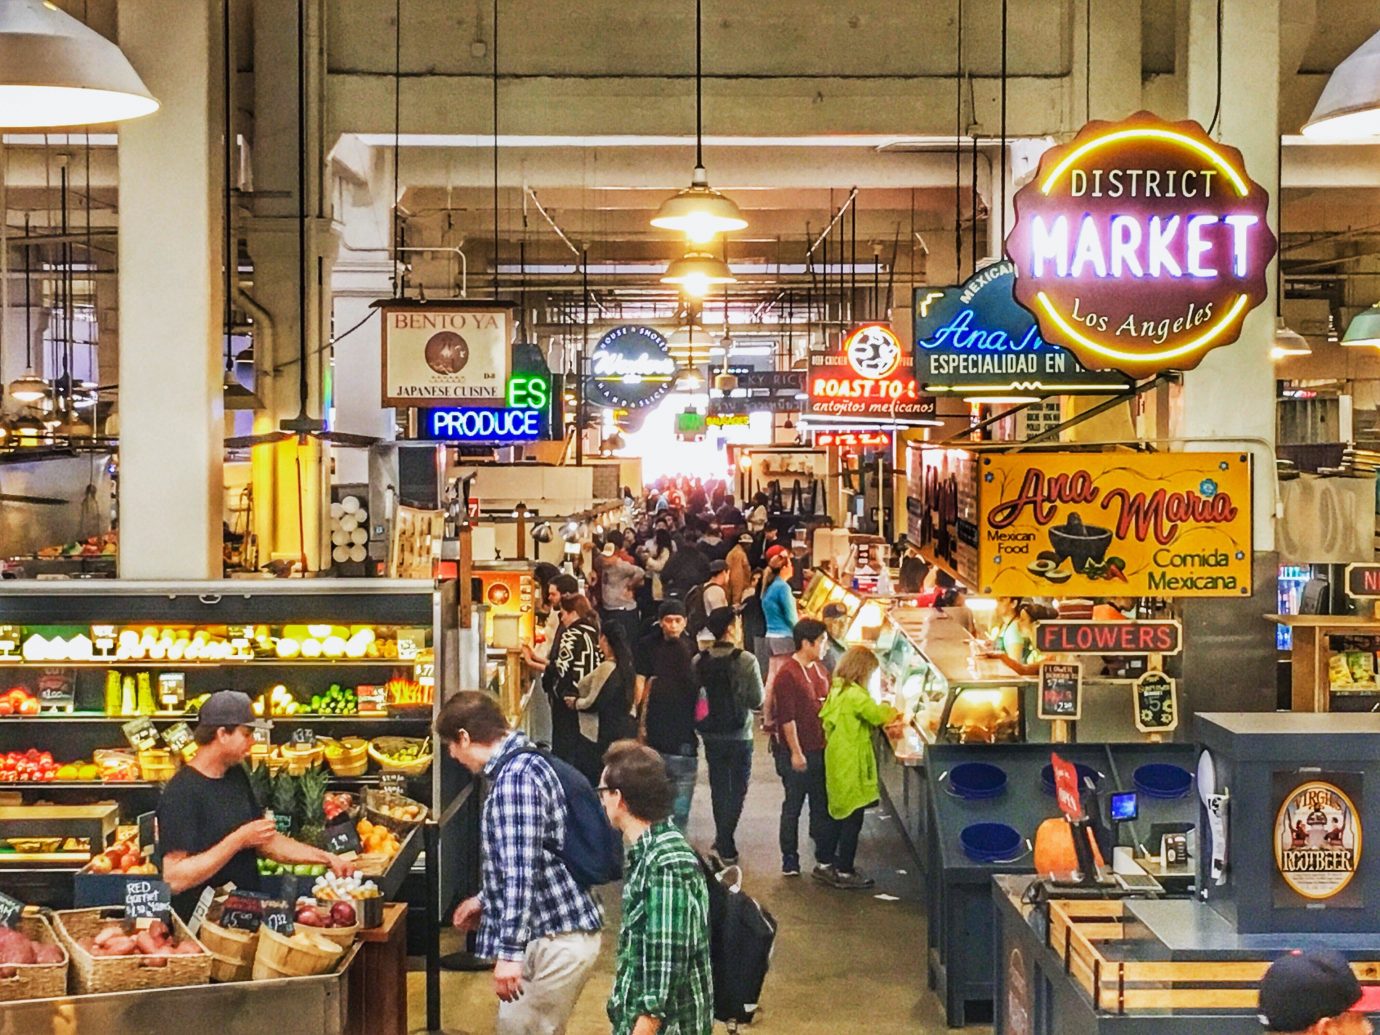 Food + Drink marketplace market retail supermarket store grocery store whole food food court bazaar grocer shopping fast food restaurant City produce sale Shop several